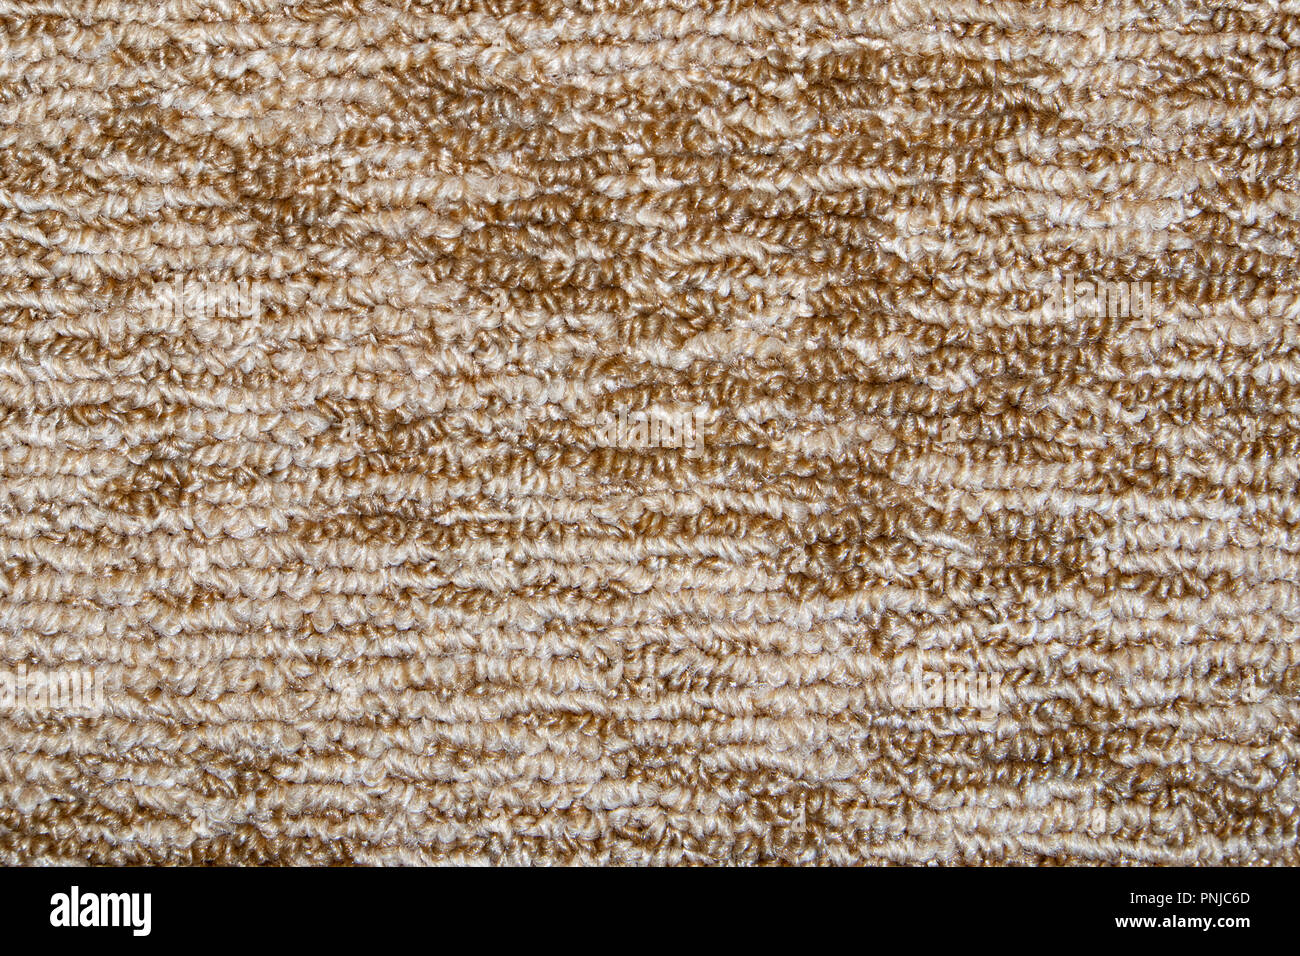 Beige striped synthetic short-napped floor carpet covering, may be used as background or texture Stock Photo